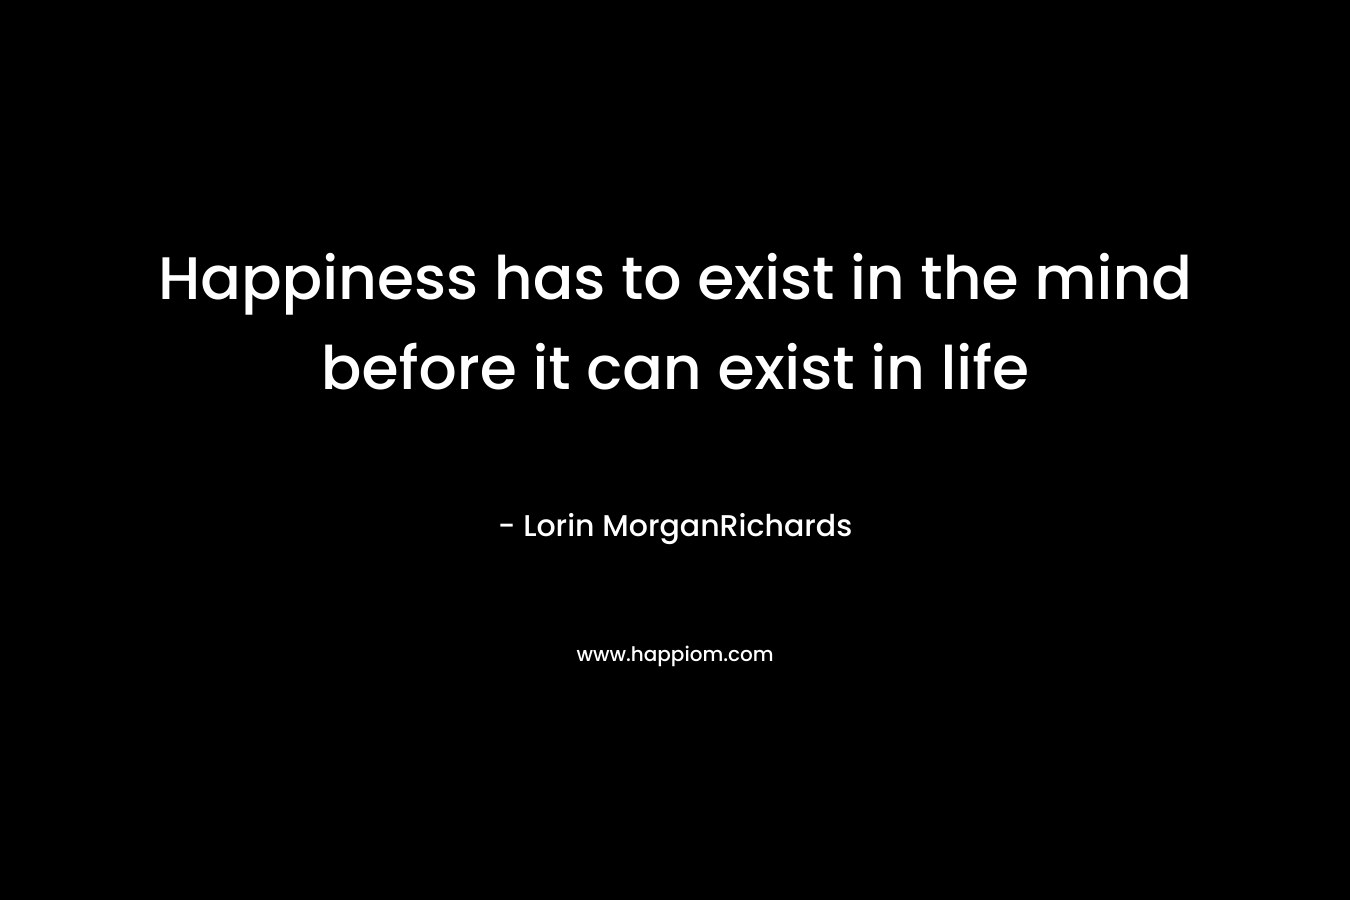 Happiness has to exist in the mind before it can exist in life